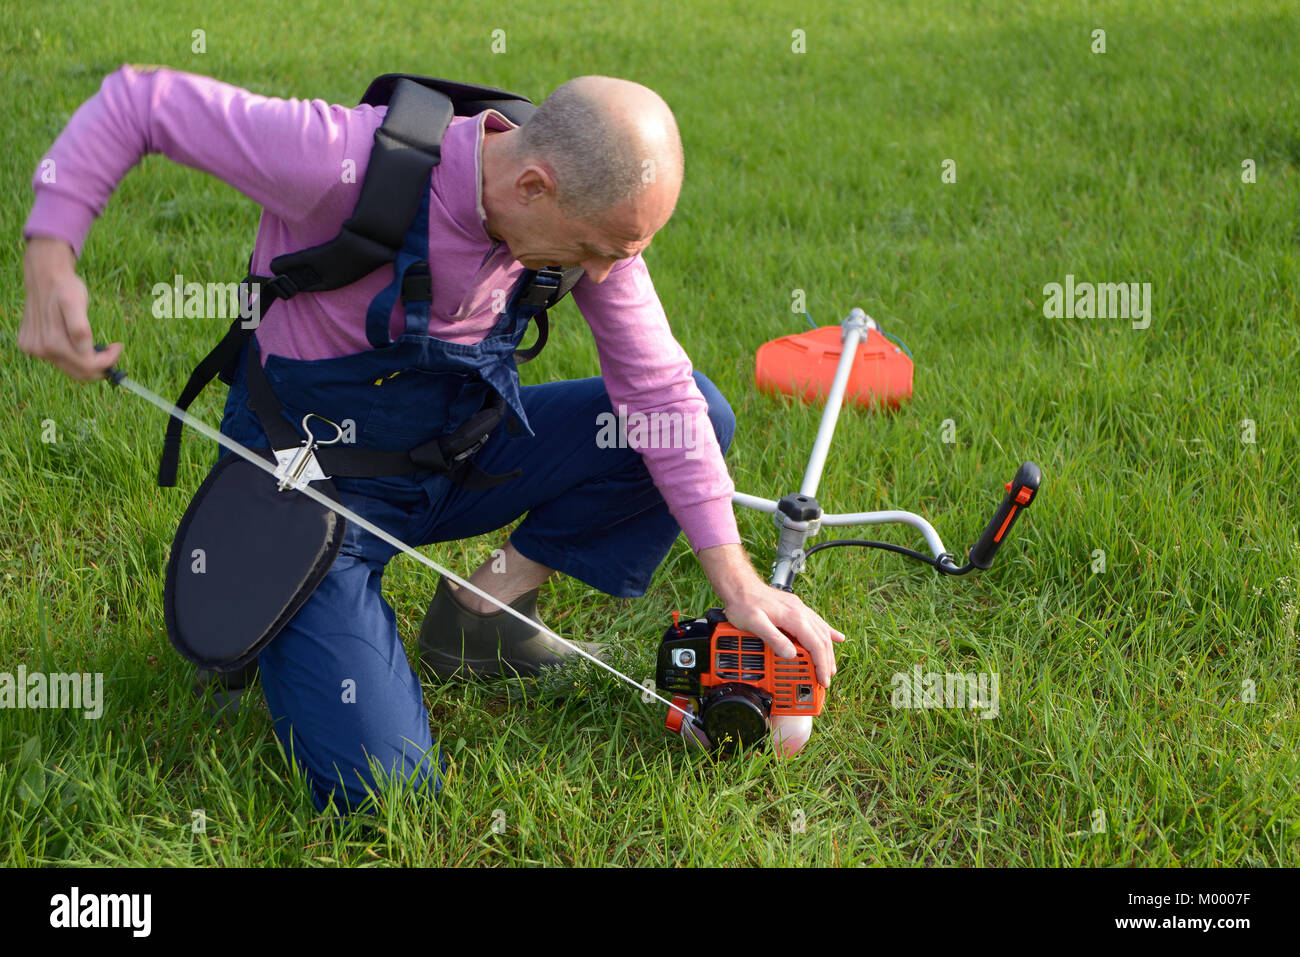 The man starts a weed trimmer on a lawn Stock Photo